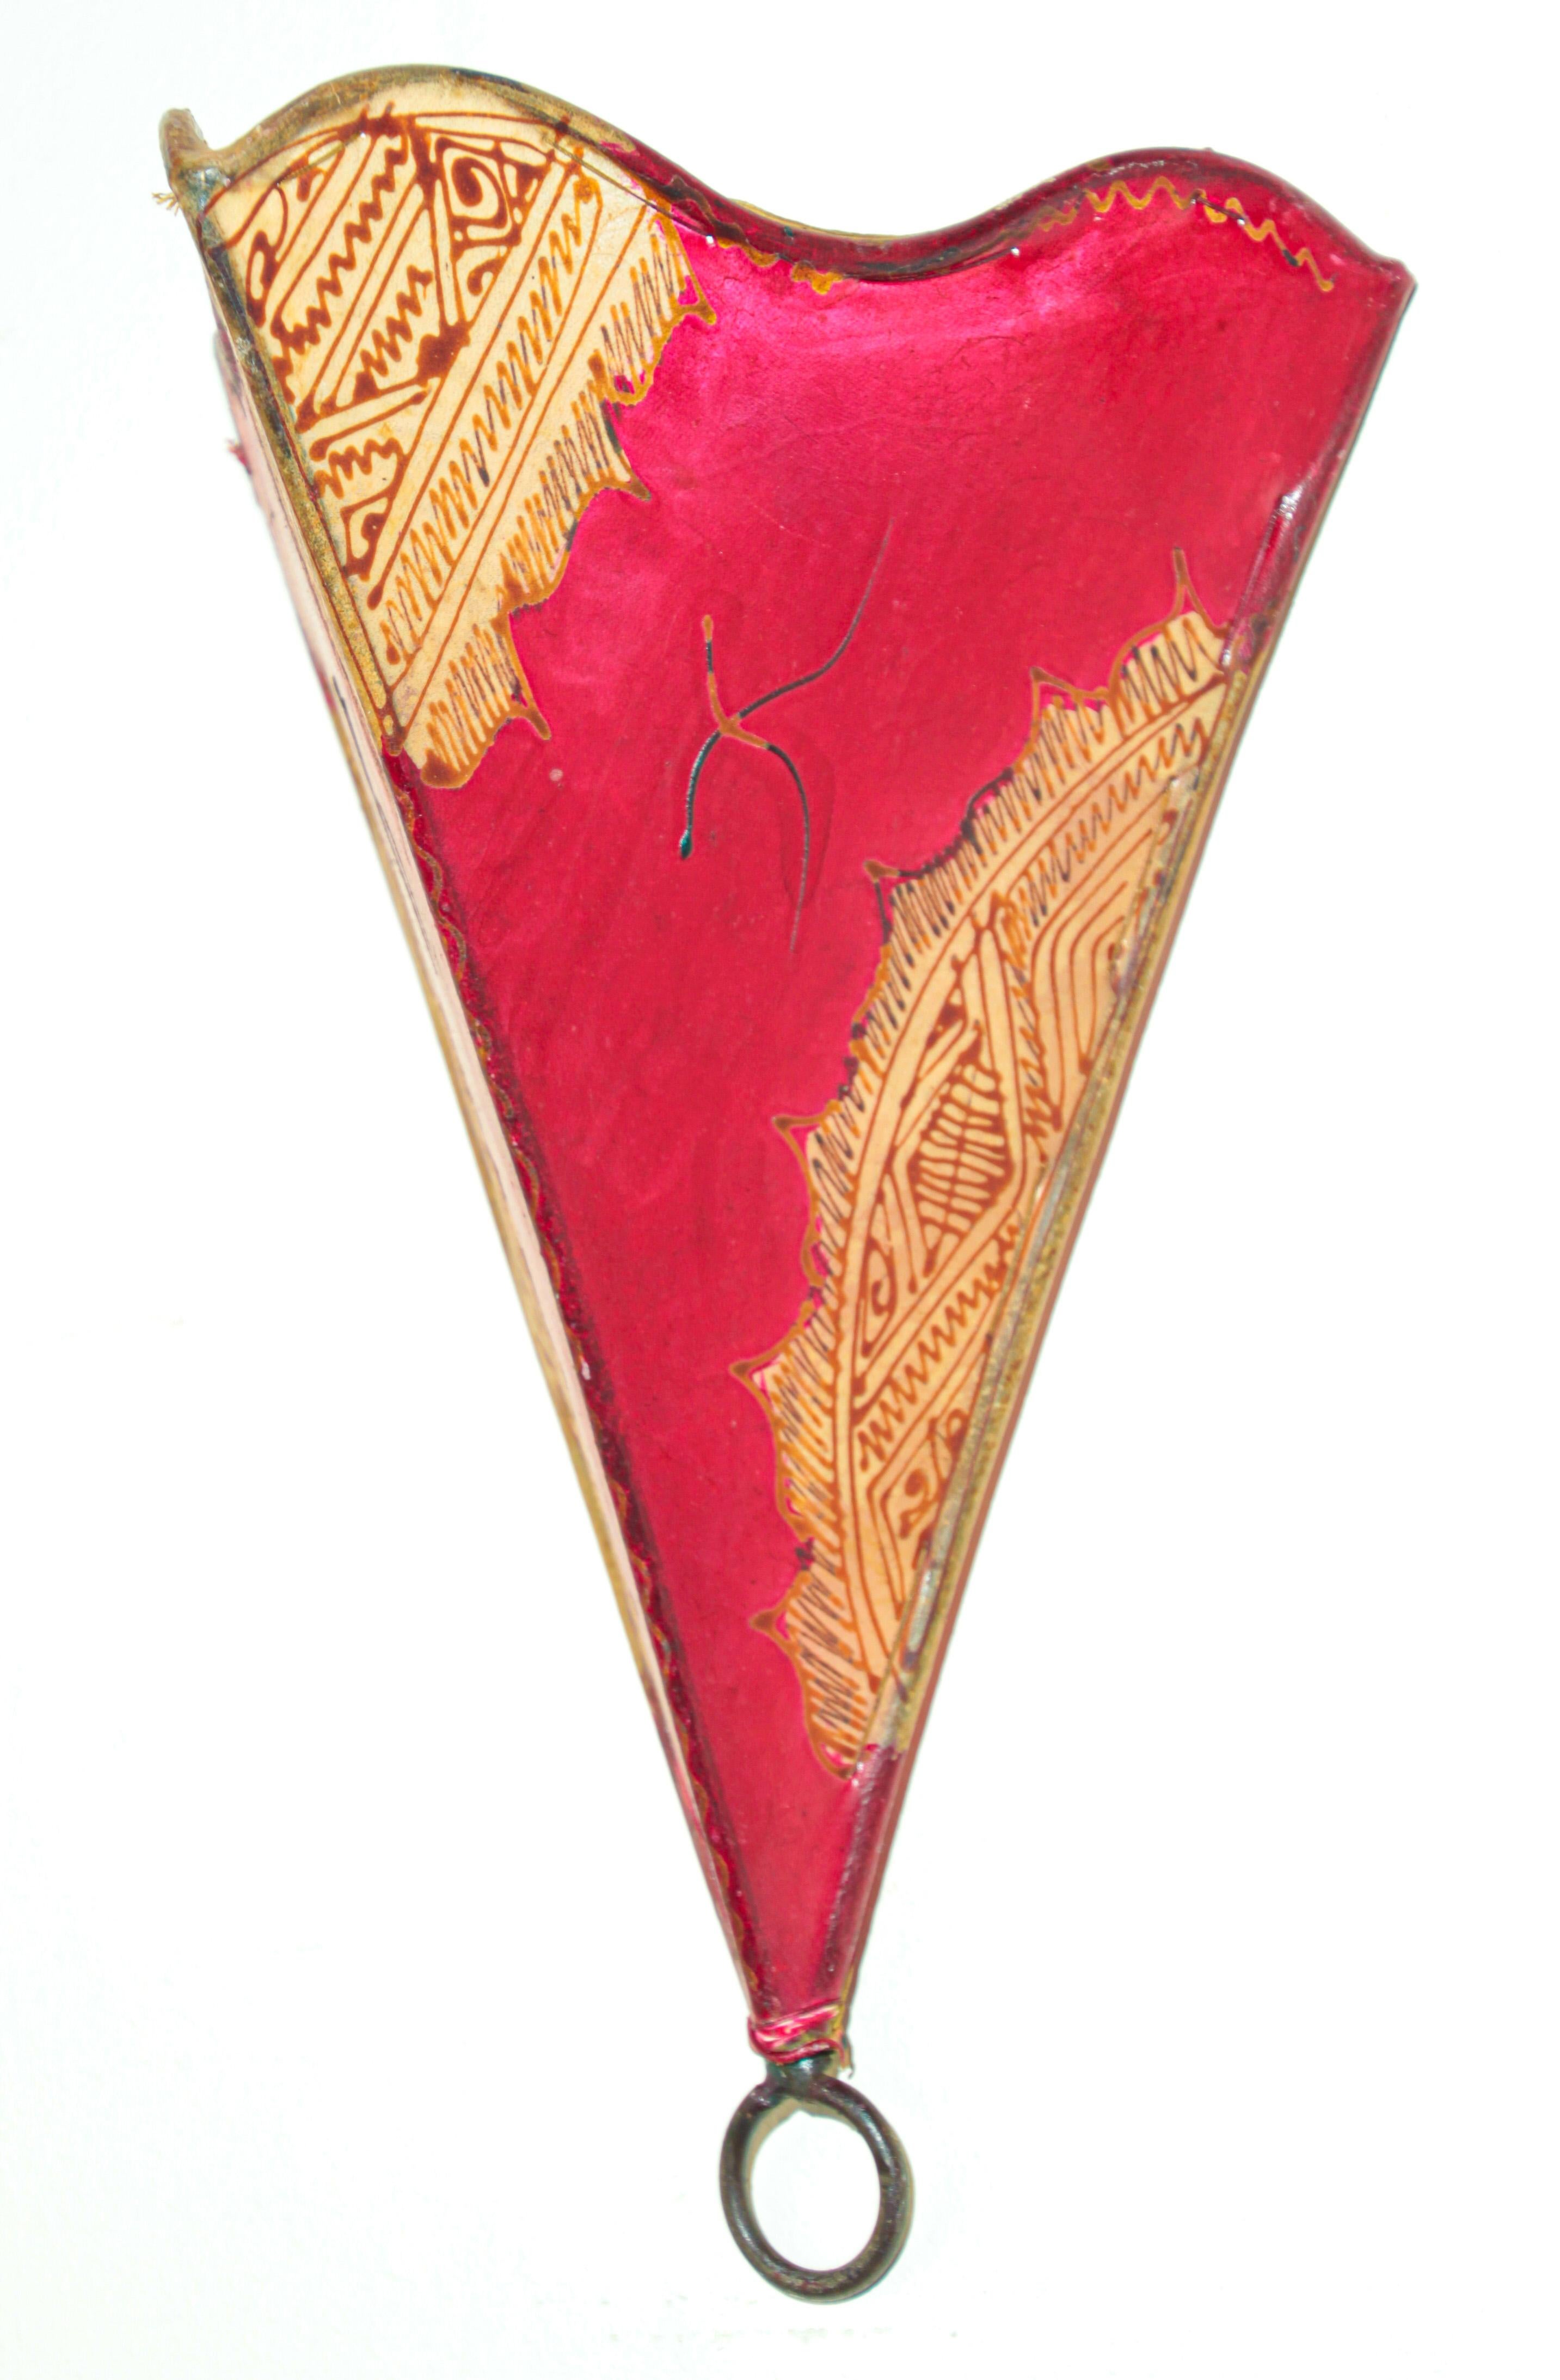 African Tribal Art parchment wall shade sconce featuring a large triangle hide form stitched on iron and hand painted surface.
These Moroccan Art pieces could be used as wall lamp shade.
Iron frame covered with hide parchment which has been hand